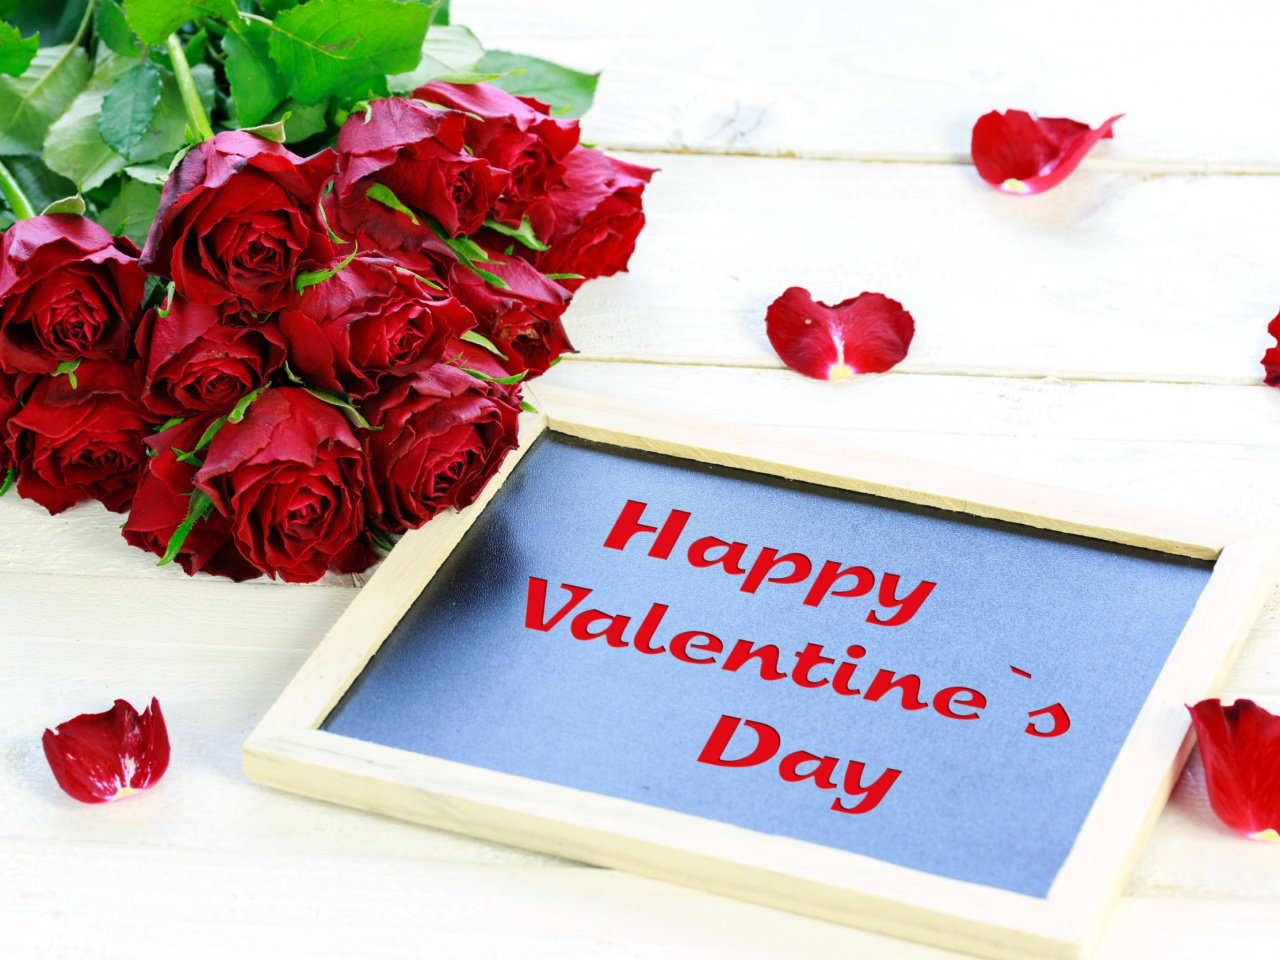 Happy Valentines Day with Roses wallpaper 1280x960